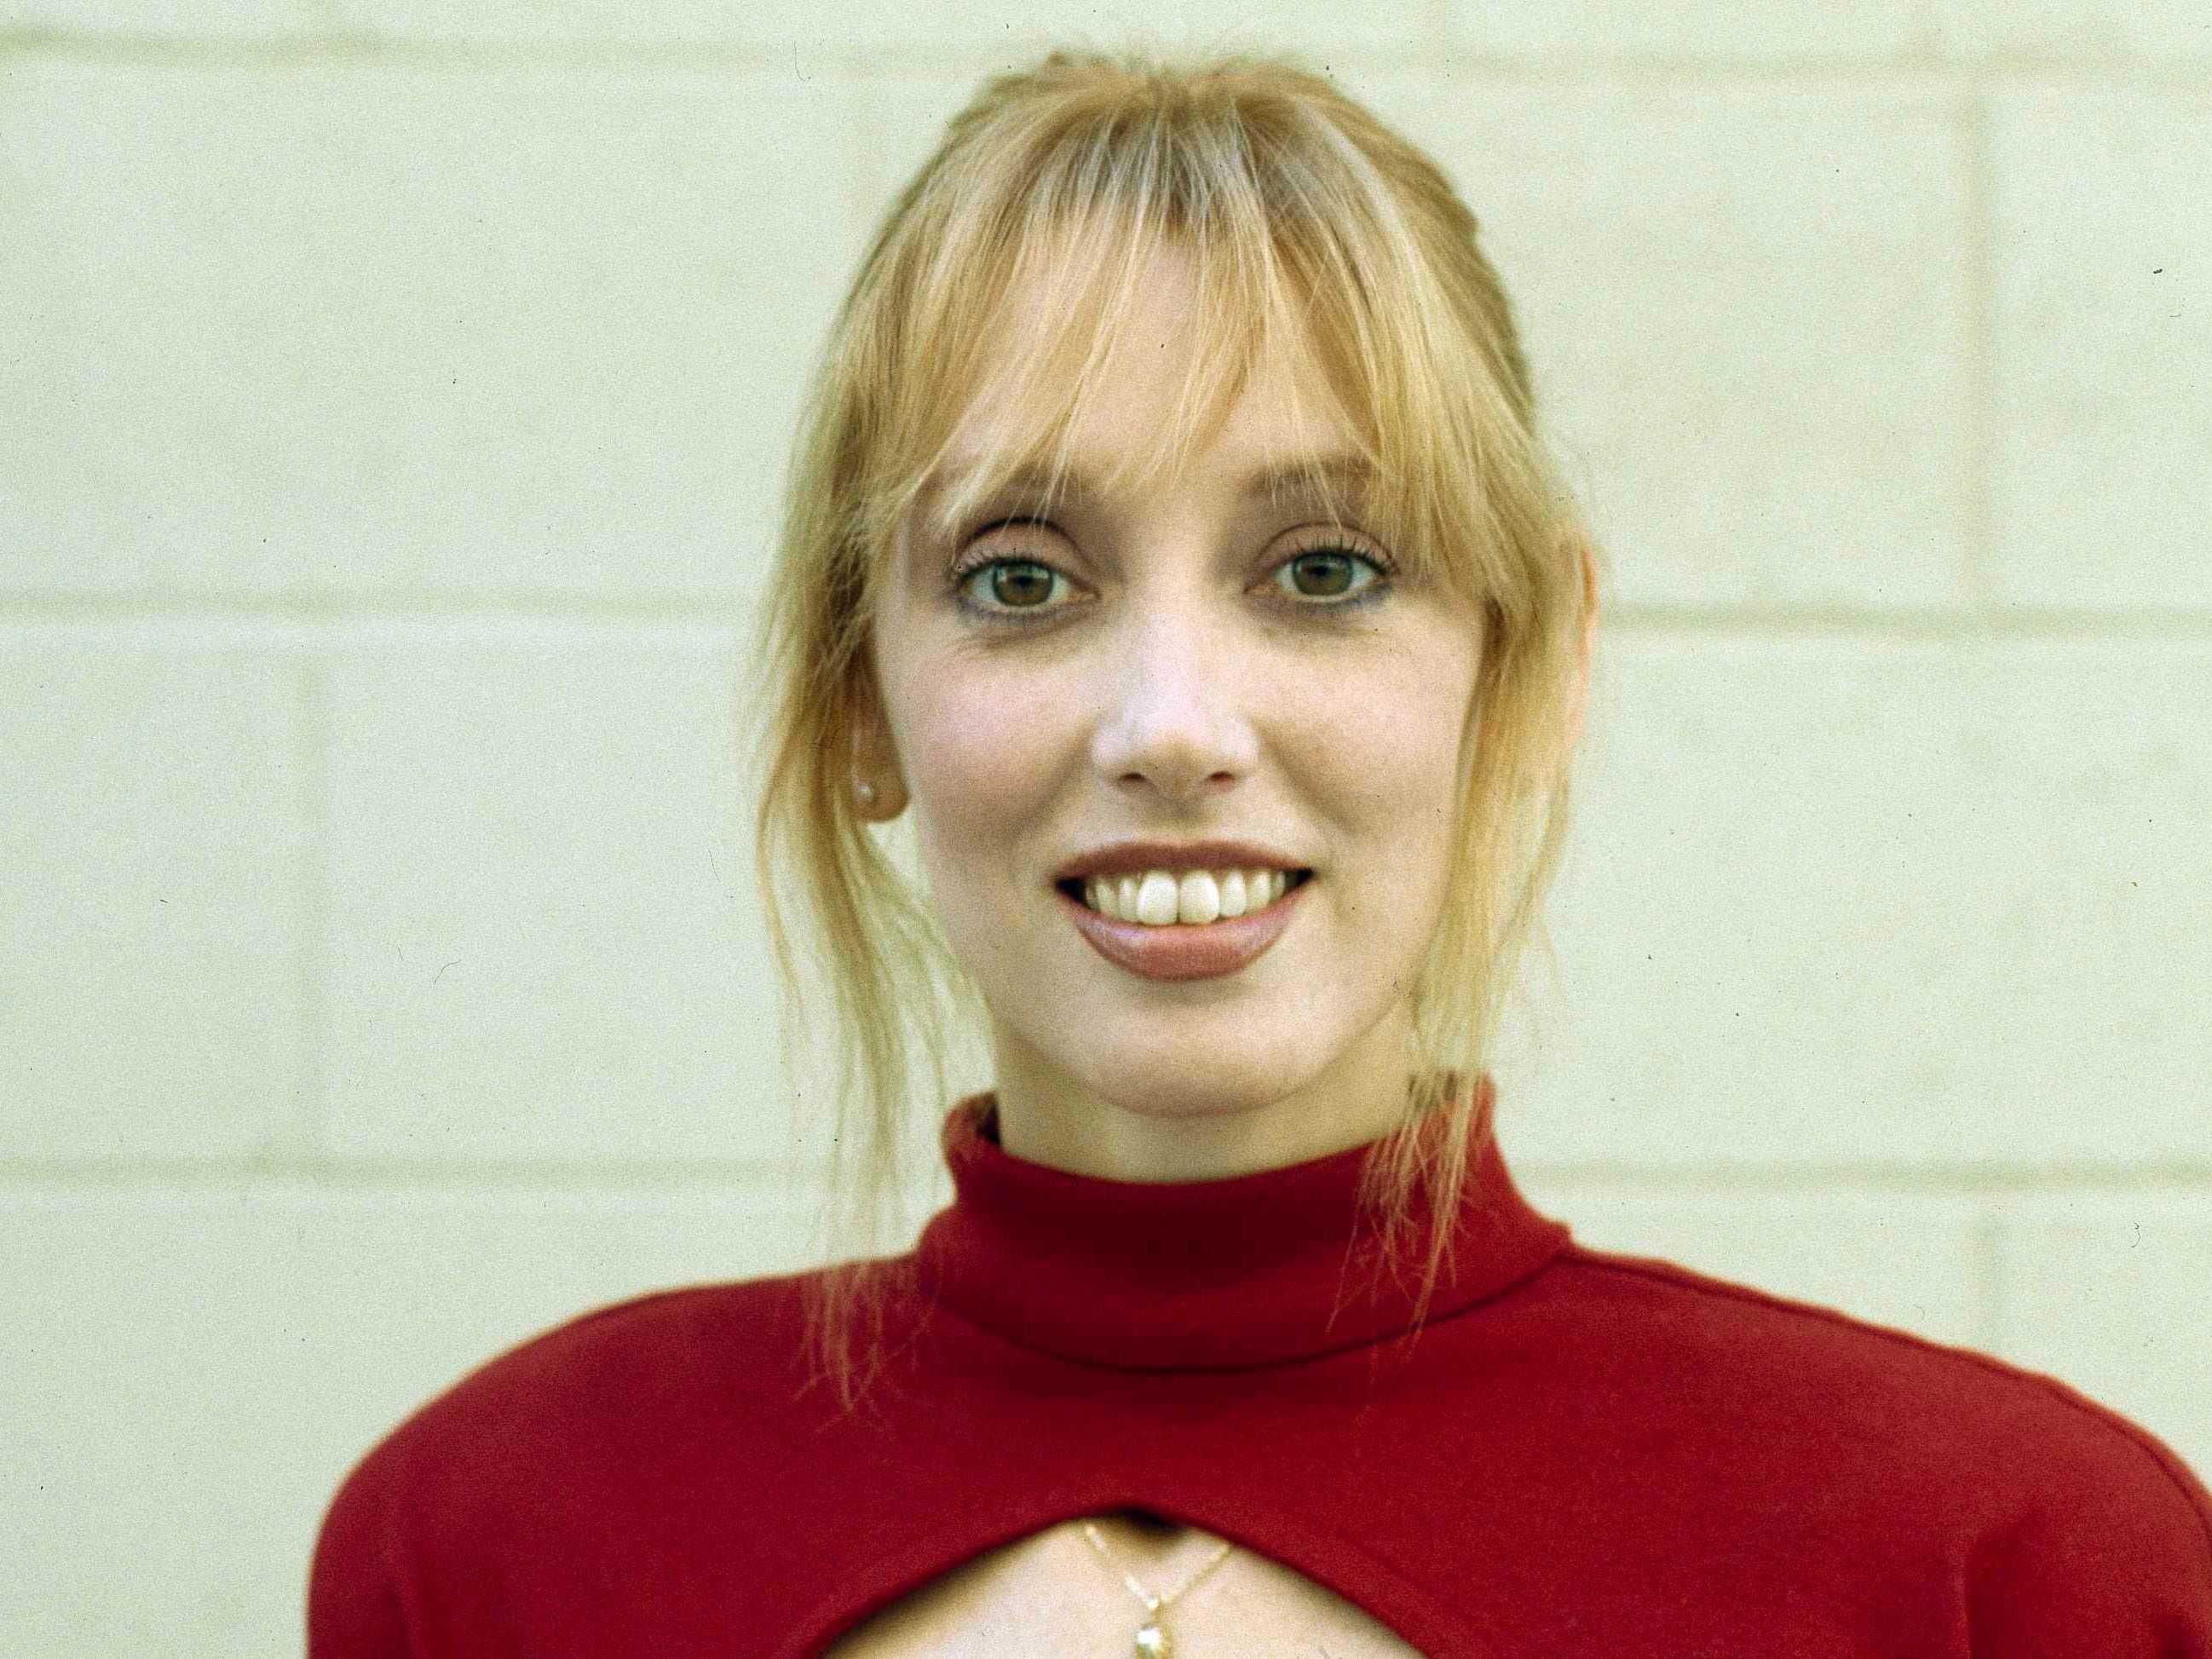 Shelley Duvall, star of The Shining and Nashville, dies aged 75